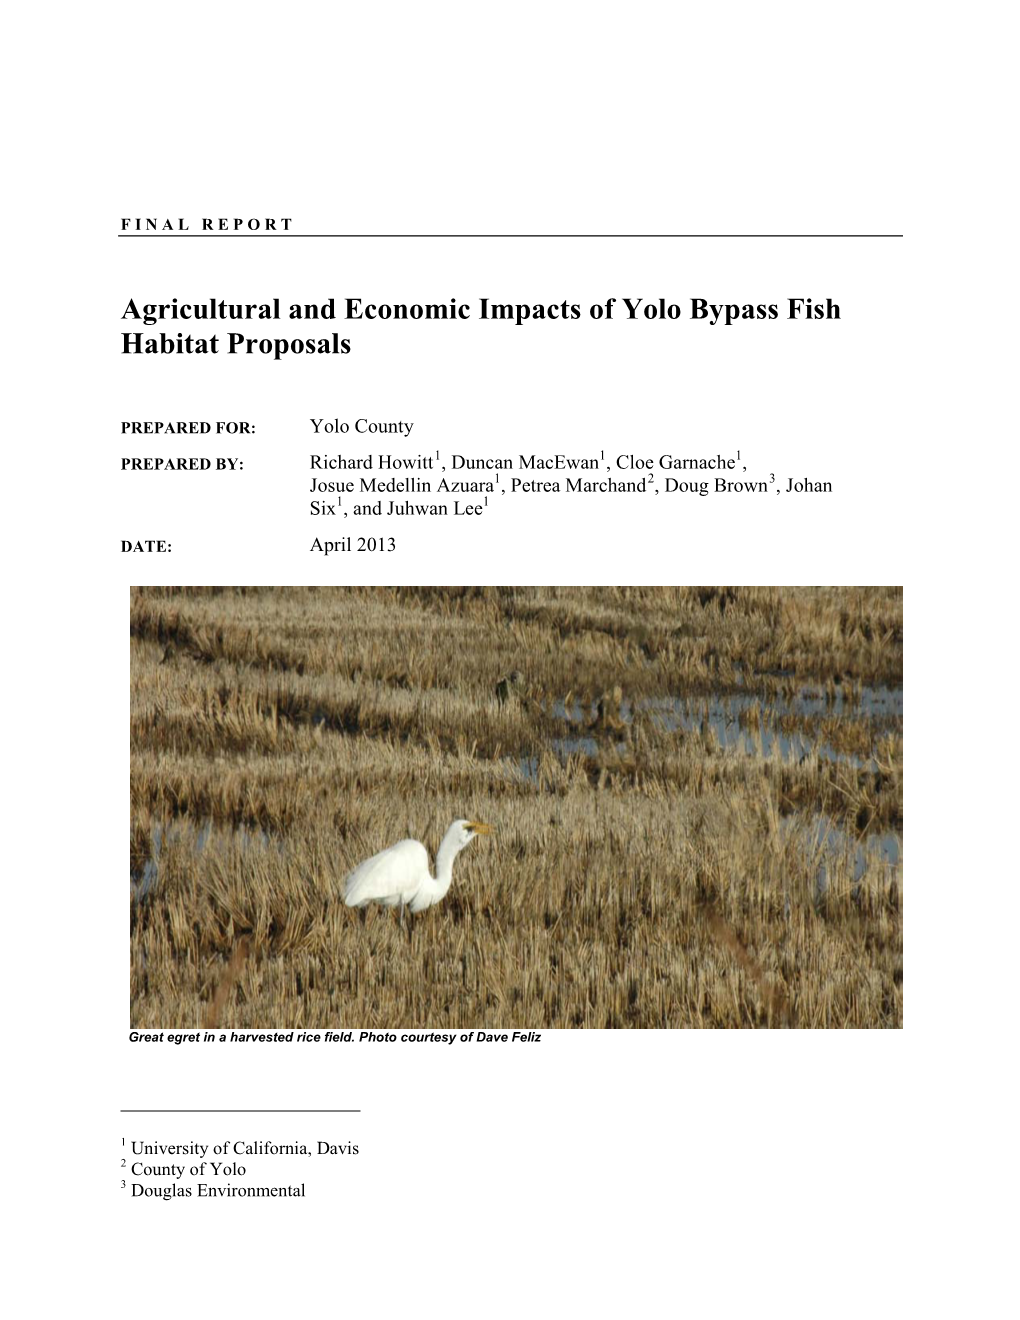 Agricultural and Economic Impacts of Yolo Bypass Fish Habitat Proposals